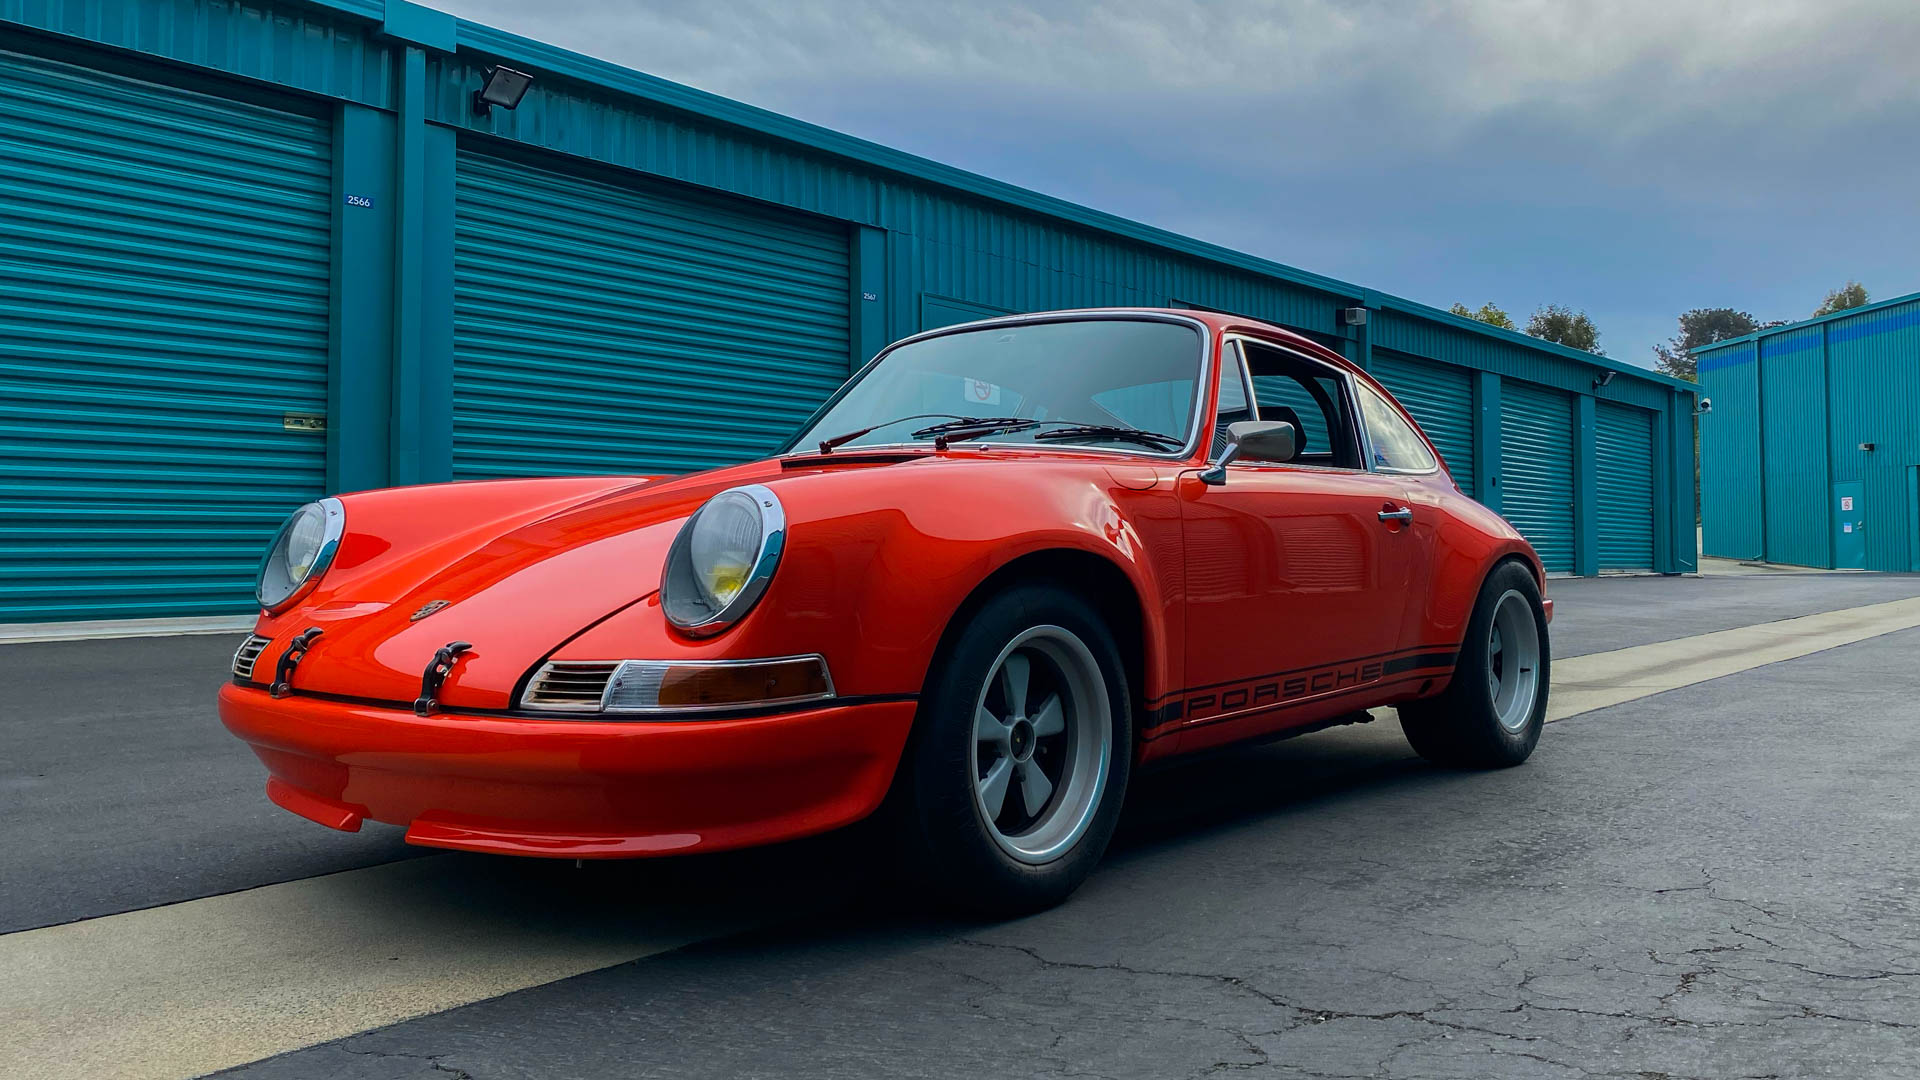 EV-Swapped Classic Porsche 911 Gets 440 HP and Up To 200 Miles of Range